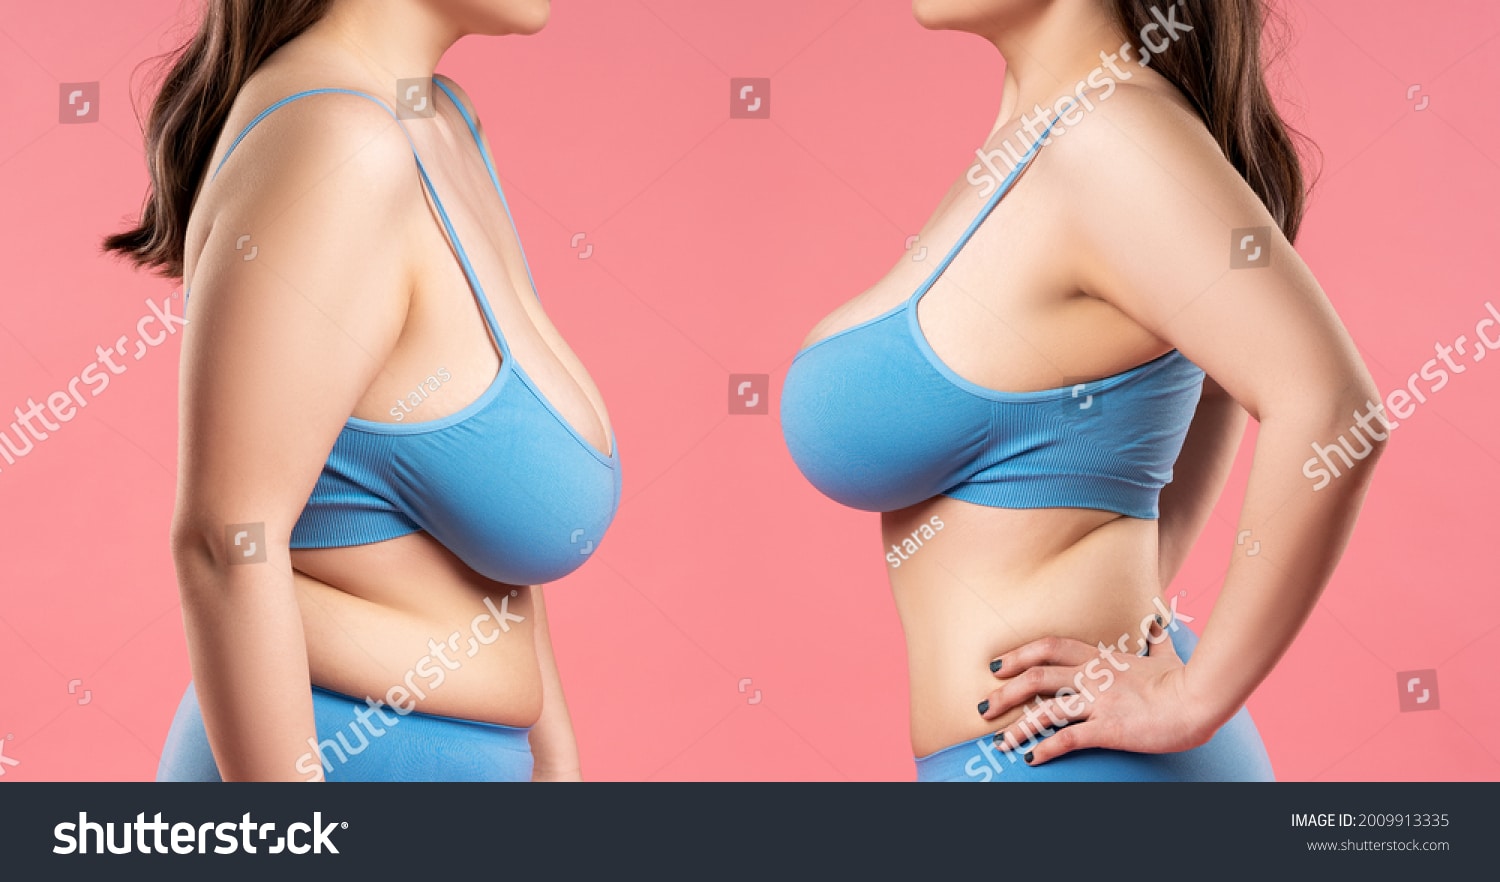 stock-photo-before-and-after-breast-augmentation-concept-woman-with-very-large-silicone-breasts-after-2009913335